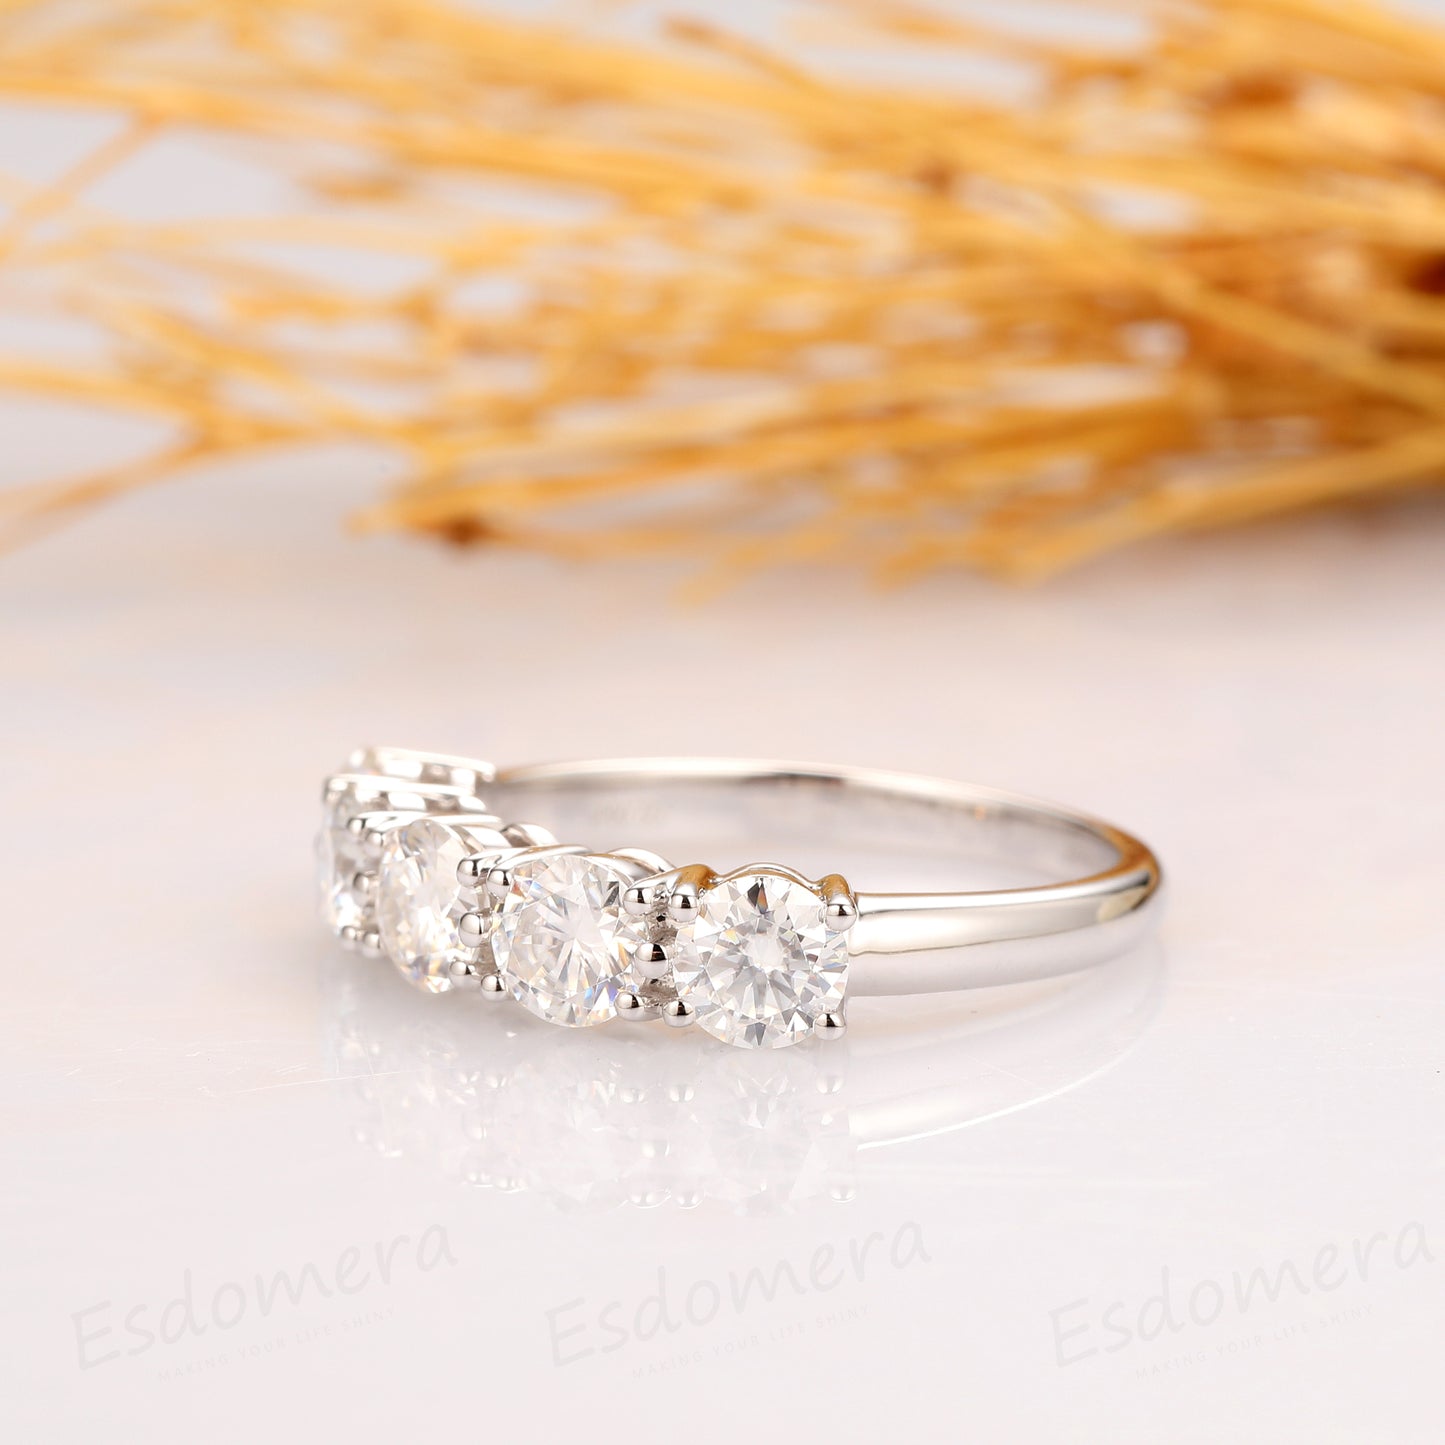 2.0ctw Round Cut Moissanite Wedding Ring, 14k Solid Gold 5 Stone Ring